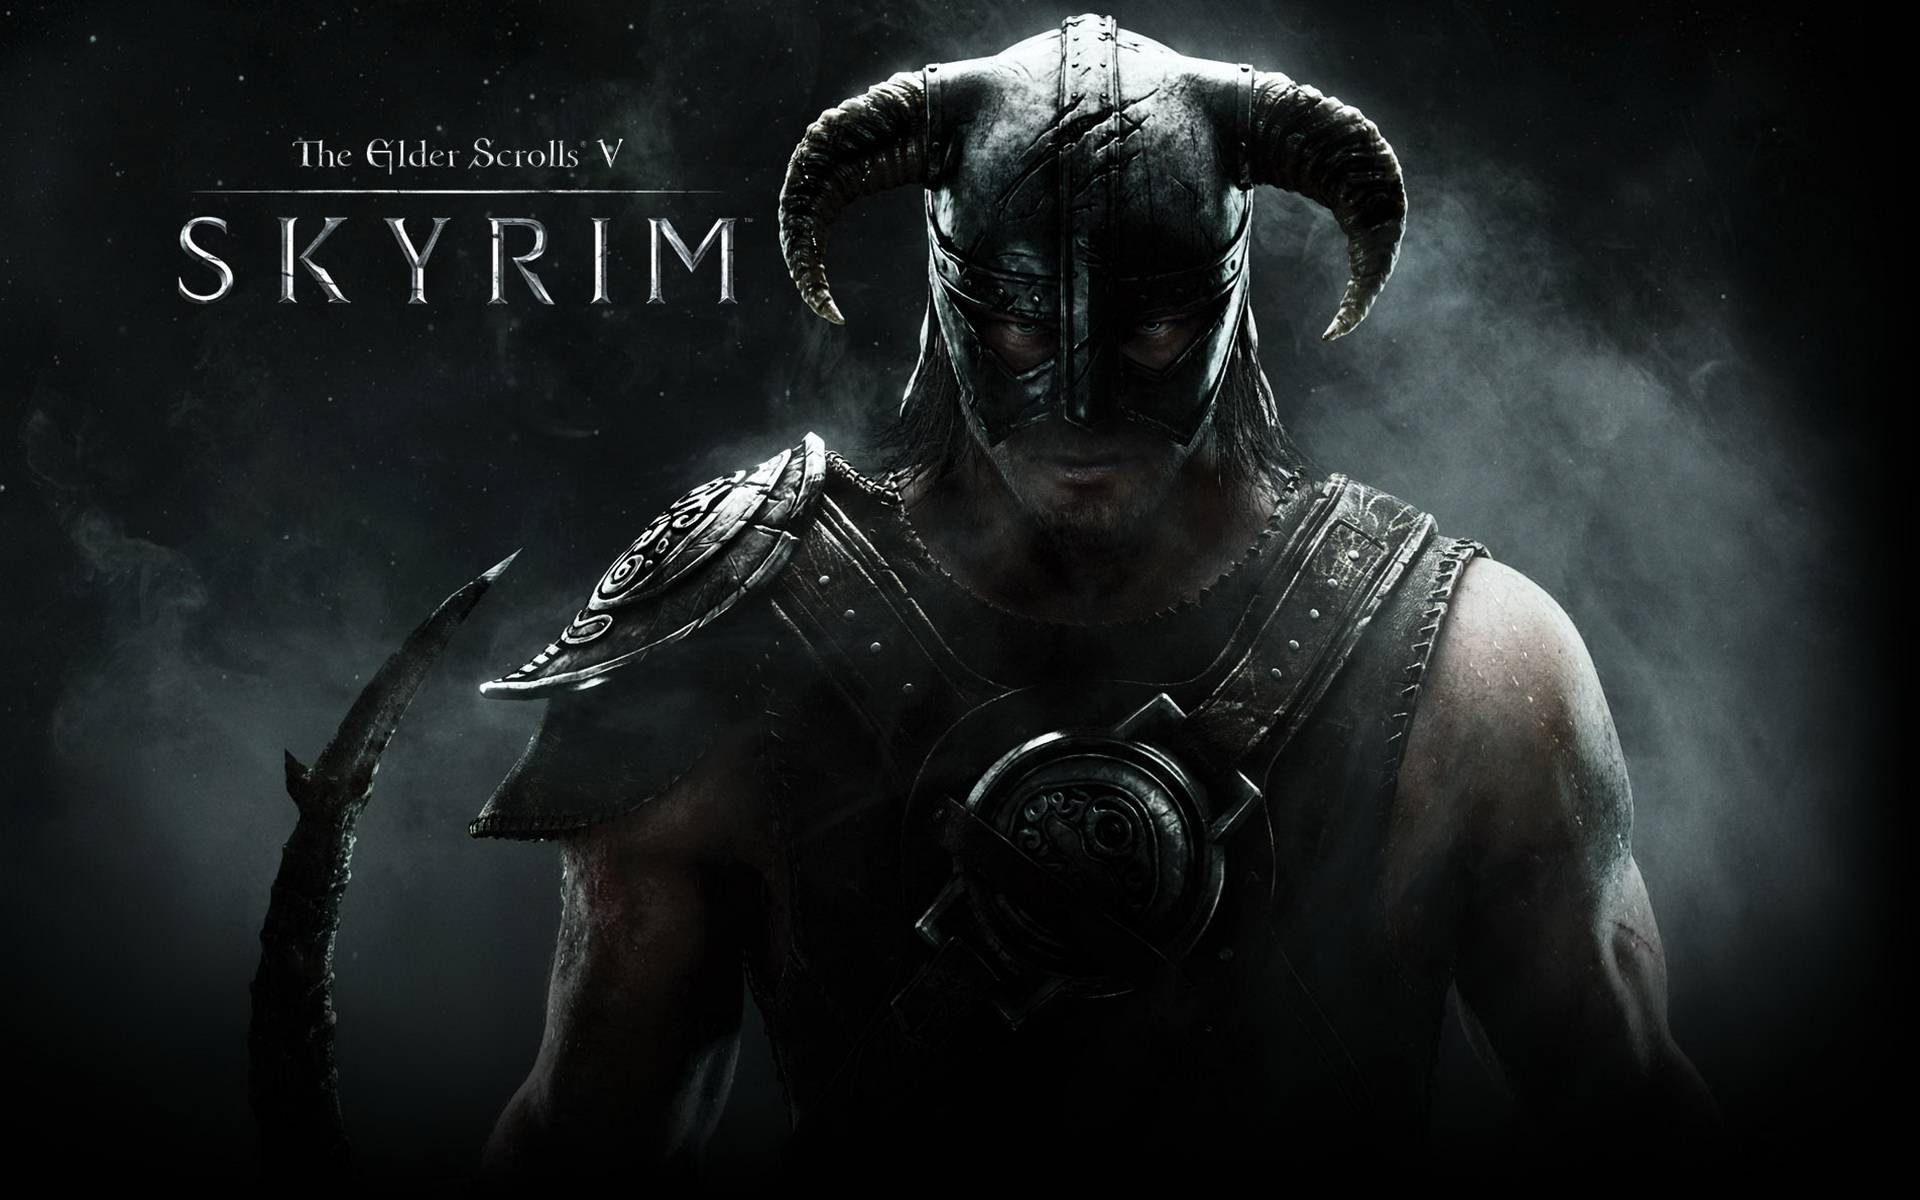 New Skyrim Special Edition Gameplay Trailer is out!